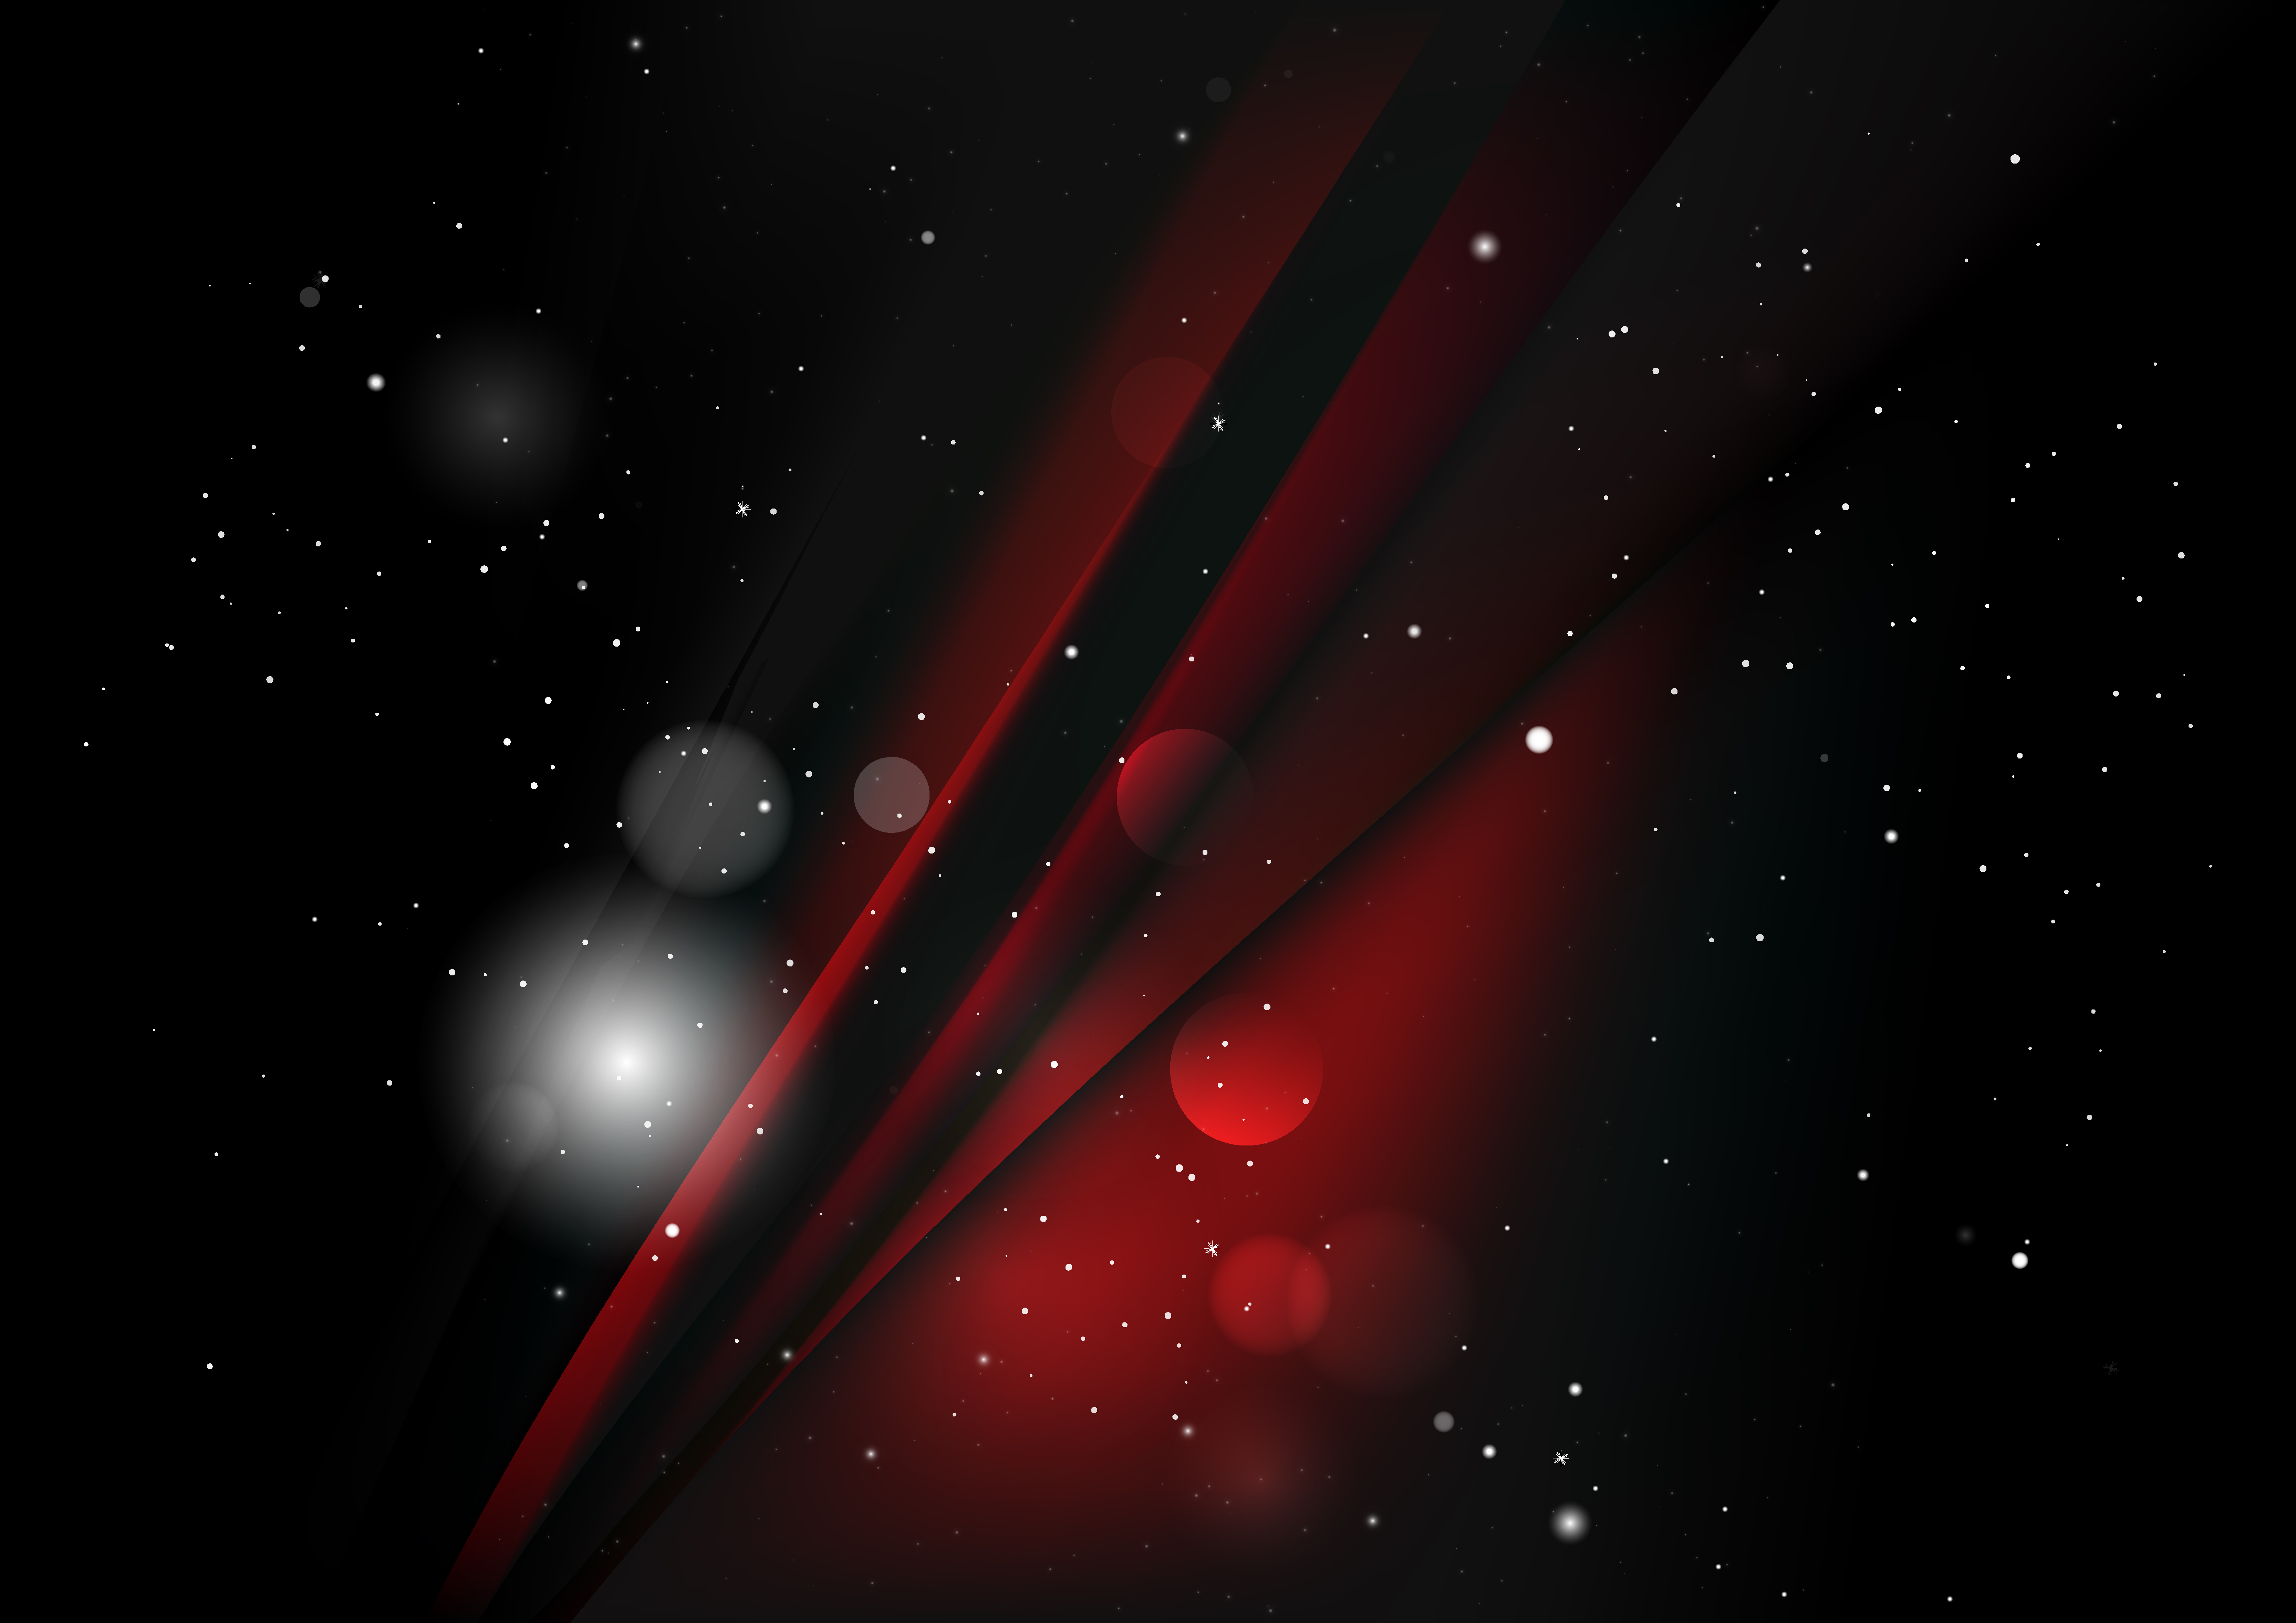 https://files.123freevectors.com/wp-content/original/189528-shiny-red-and-black-background.jpg